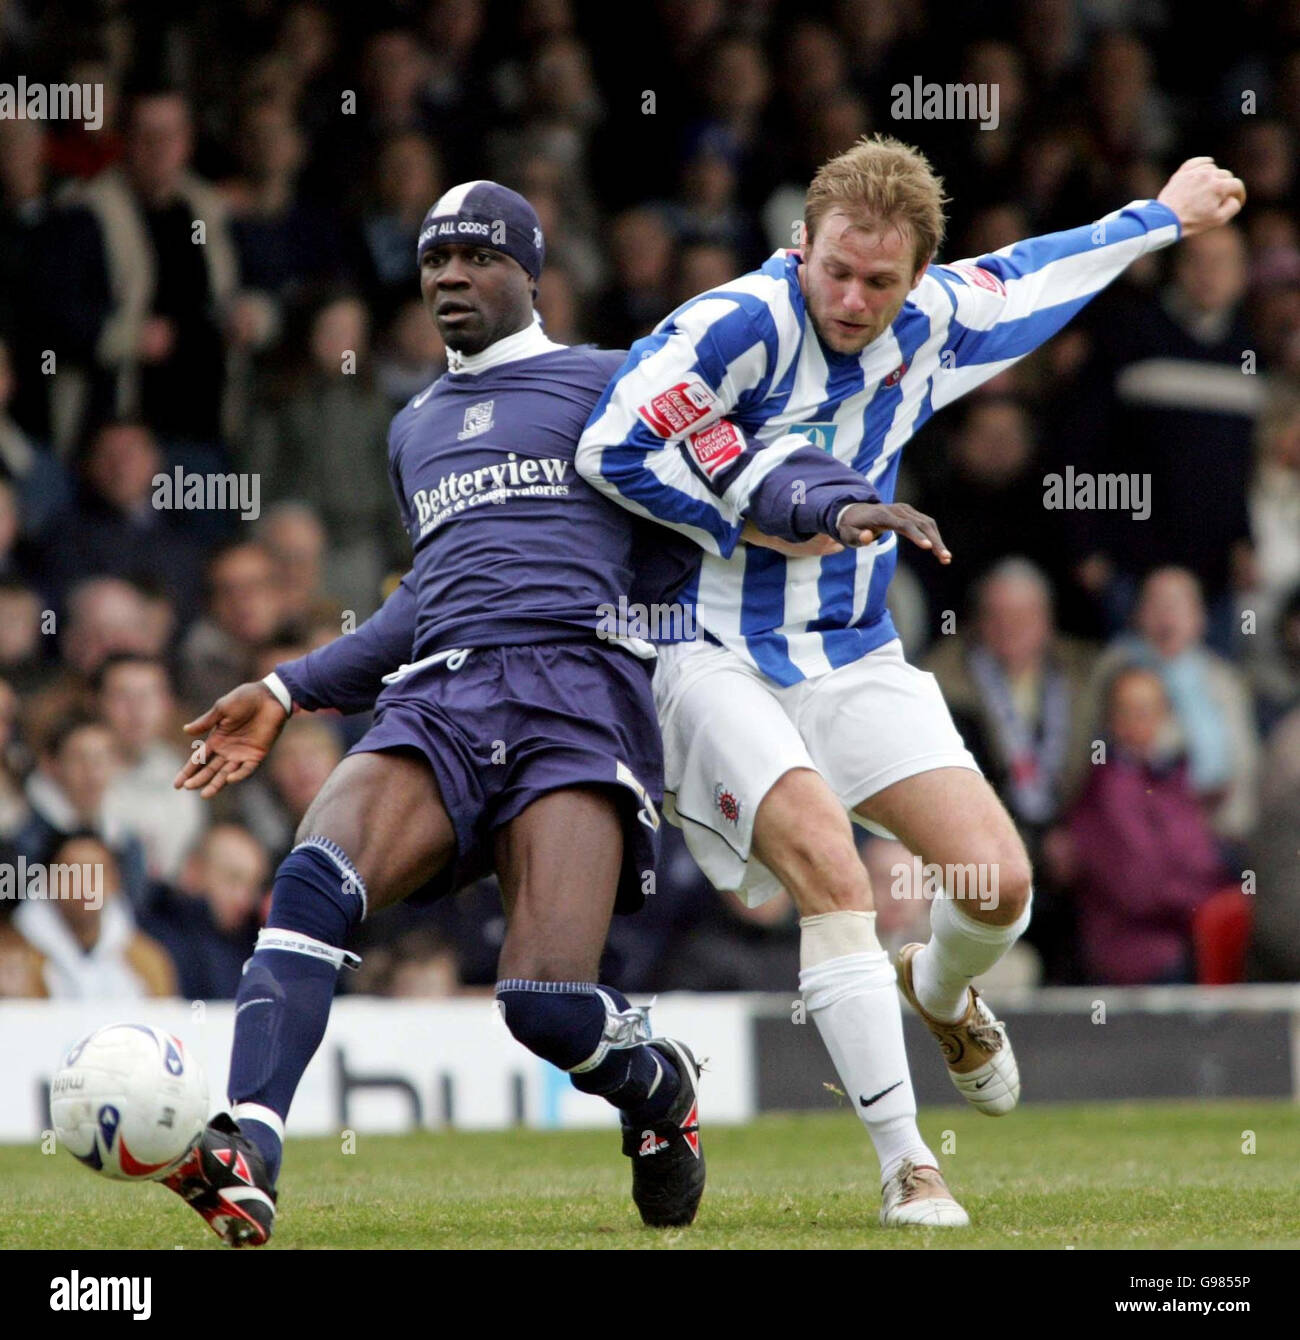 Southend's Efetobore Sodje (L) tussles for the ball with Hartlepool's Michael Proctor during the Coca-Cola League One match at Roots Hall, Southend-On-Sea, Saturday March 25, 2006. PRESS ASSOCIATION Photo. Photo credit should read: Mark Lees/PA. NO UNOFFICIAL CLUB WEBSITE USE. Stock Photo